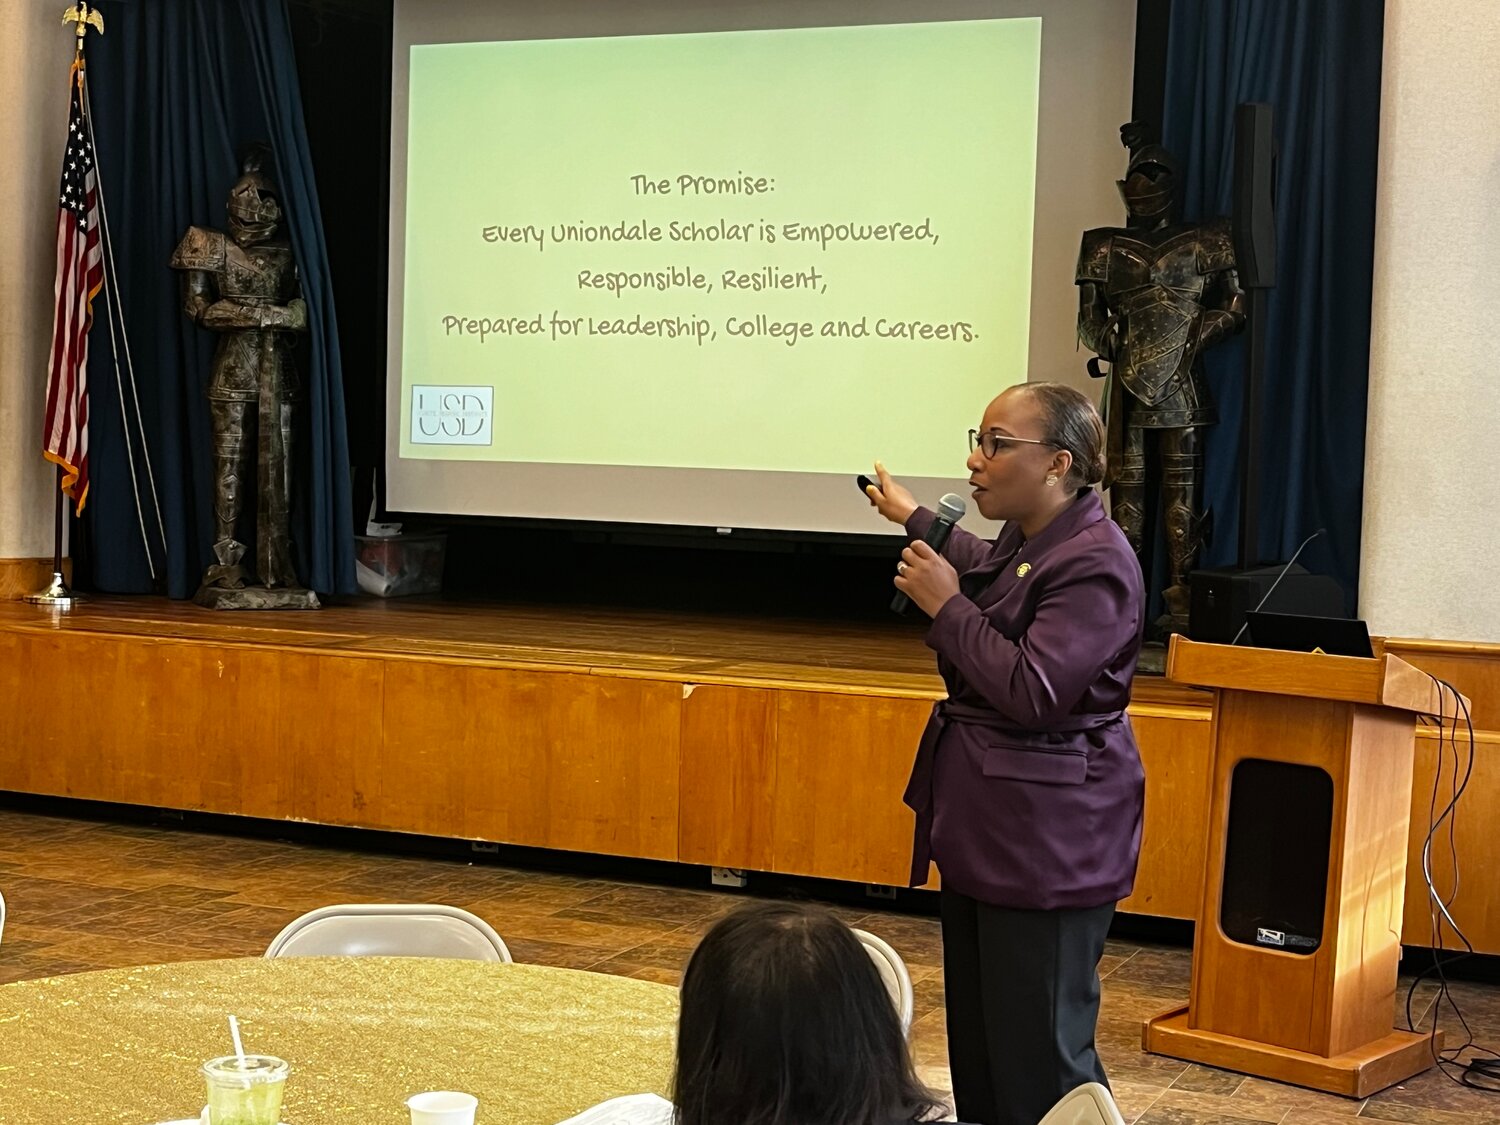 Uniondale’s Superintendent Monique Darrisaw-Akil, giving a presentation on Uniondale’s promise and commitment for its students — that it is their job to ensure that every student to walk through those halls is empowered, responsible, resilient, and prepared for not just college, but also leadership, and ultimately a career.